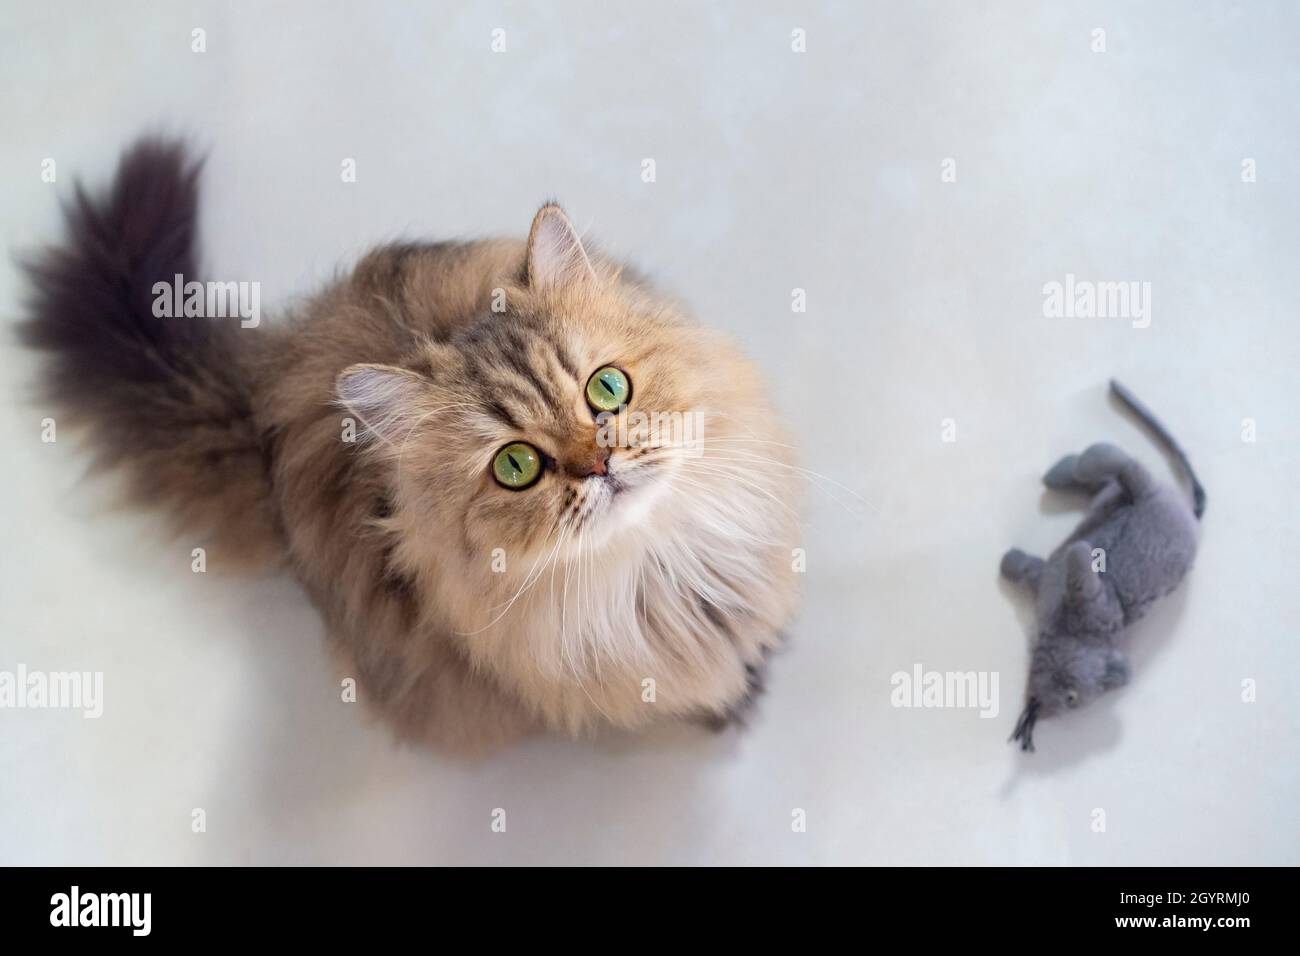 Top view of cute happy british longhair chinchilla persian kitten cat standing next mouse doll and looking up at camera owner and asking for pet food Stock Photo